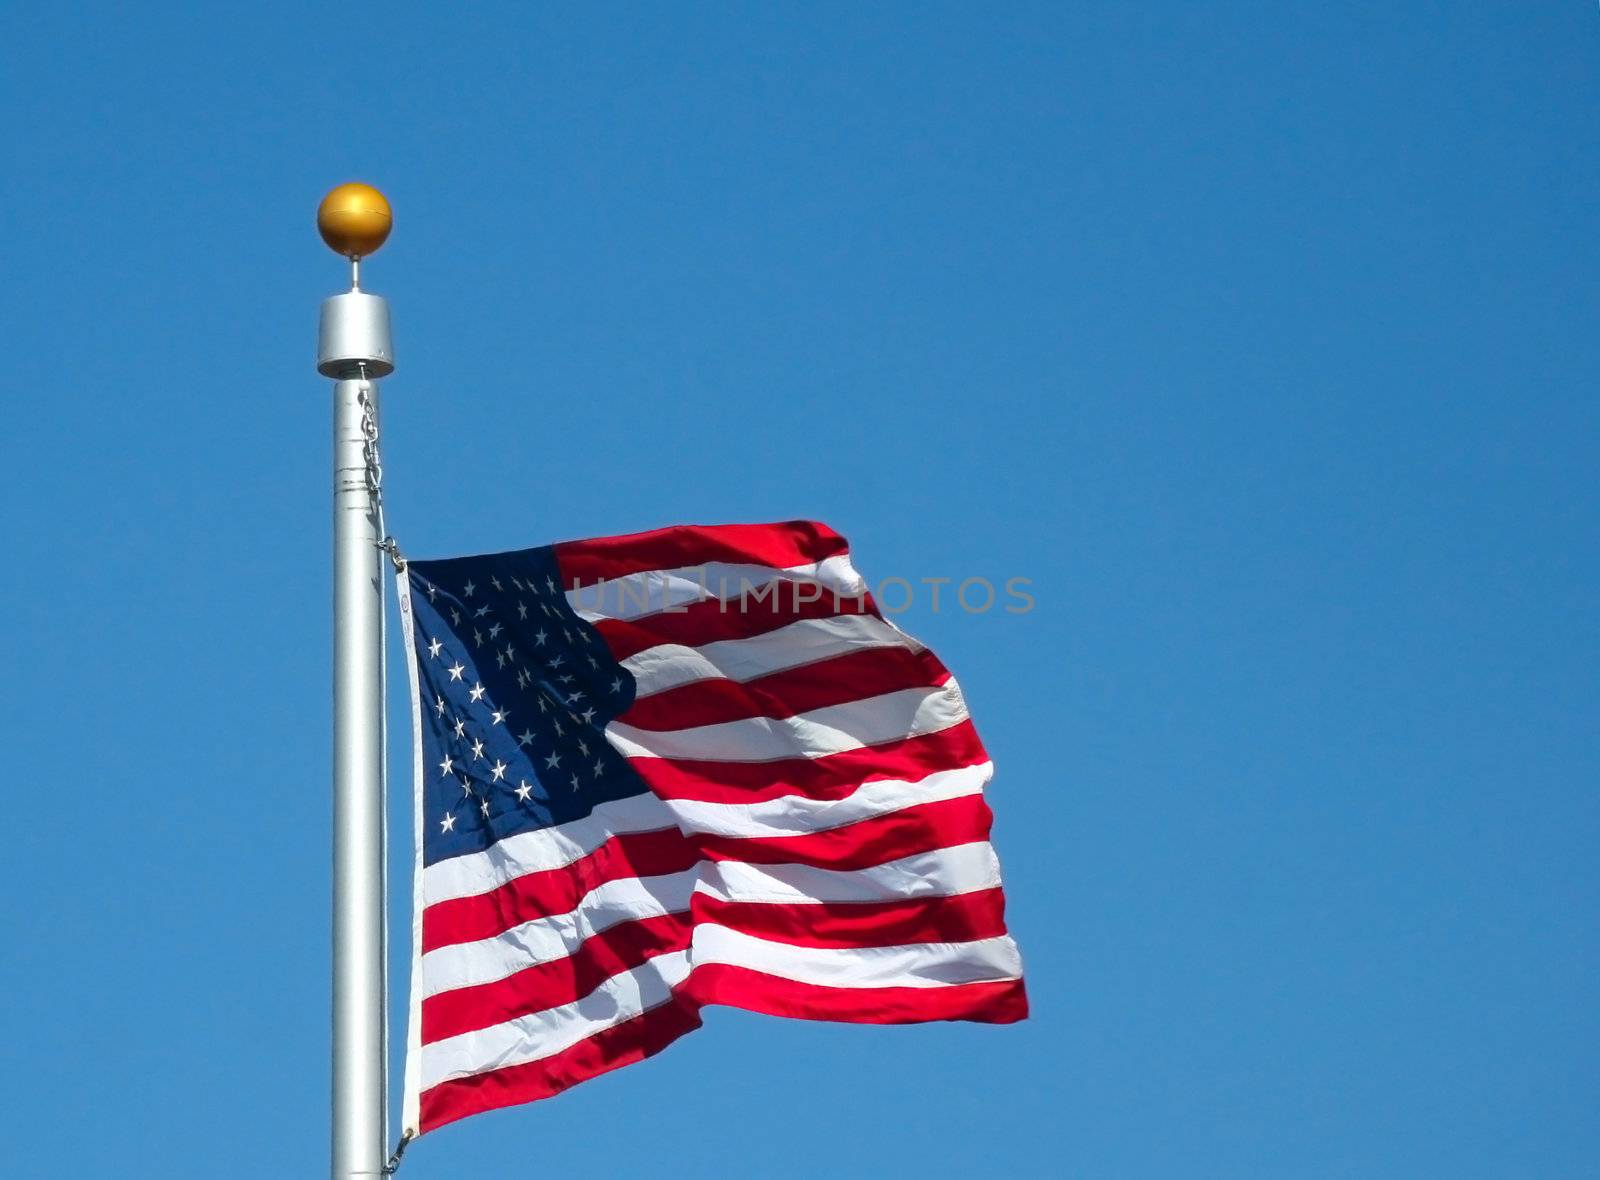 The United States of America Flag snapping in the wind